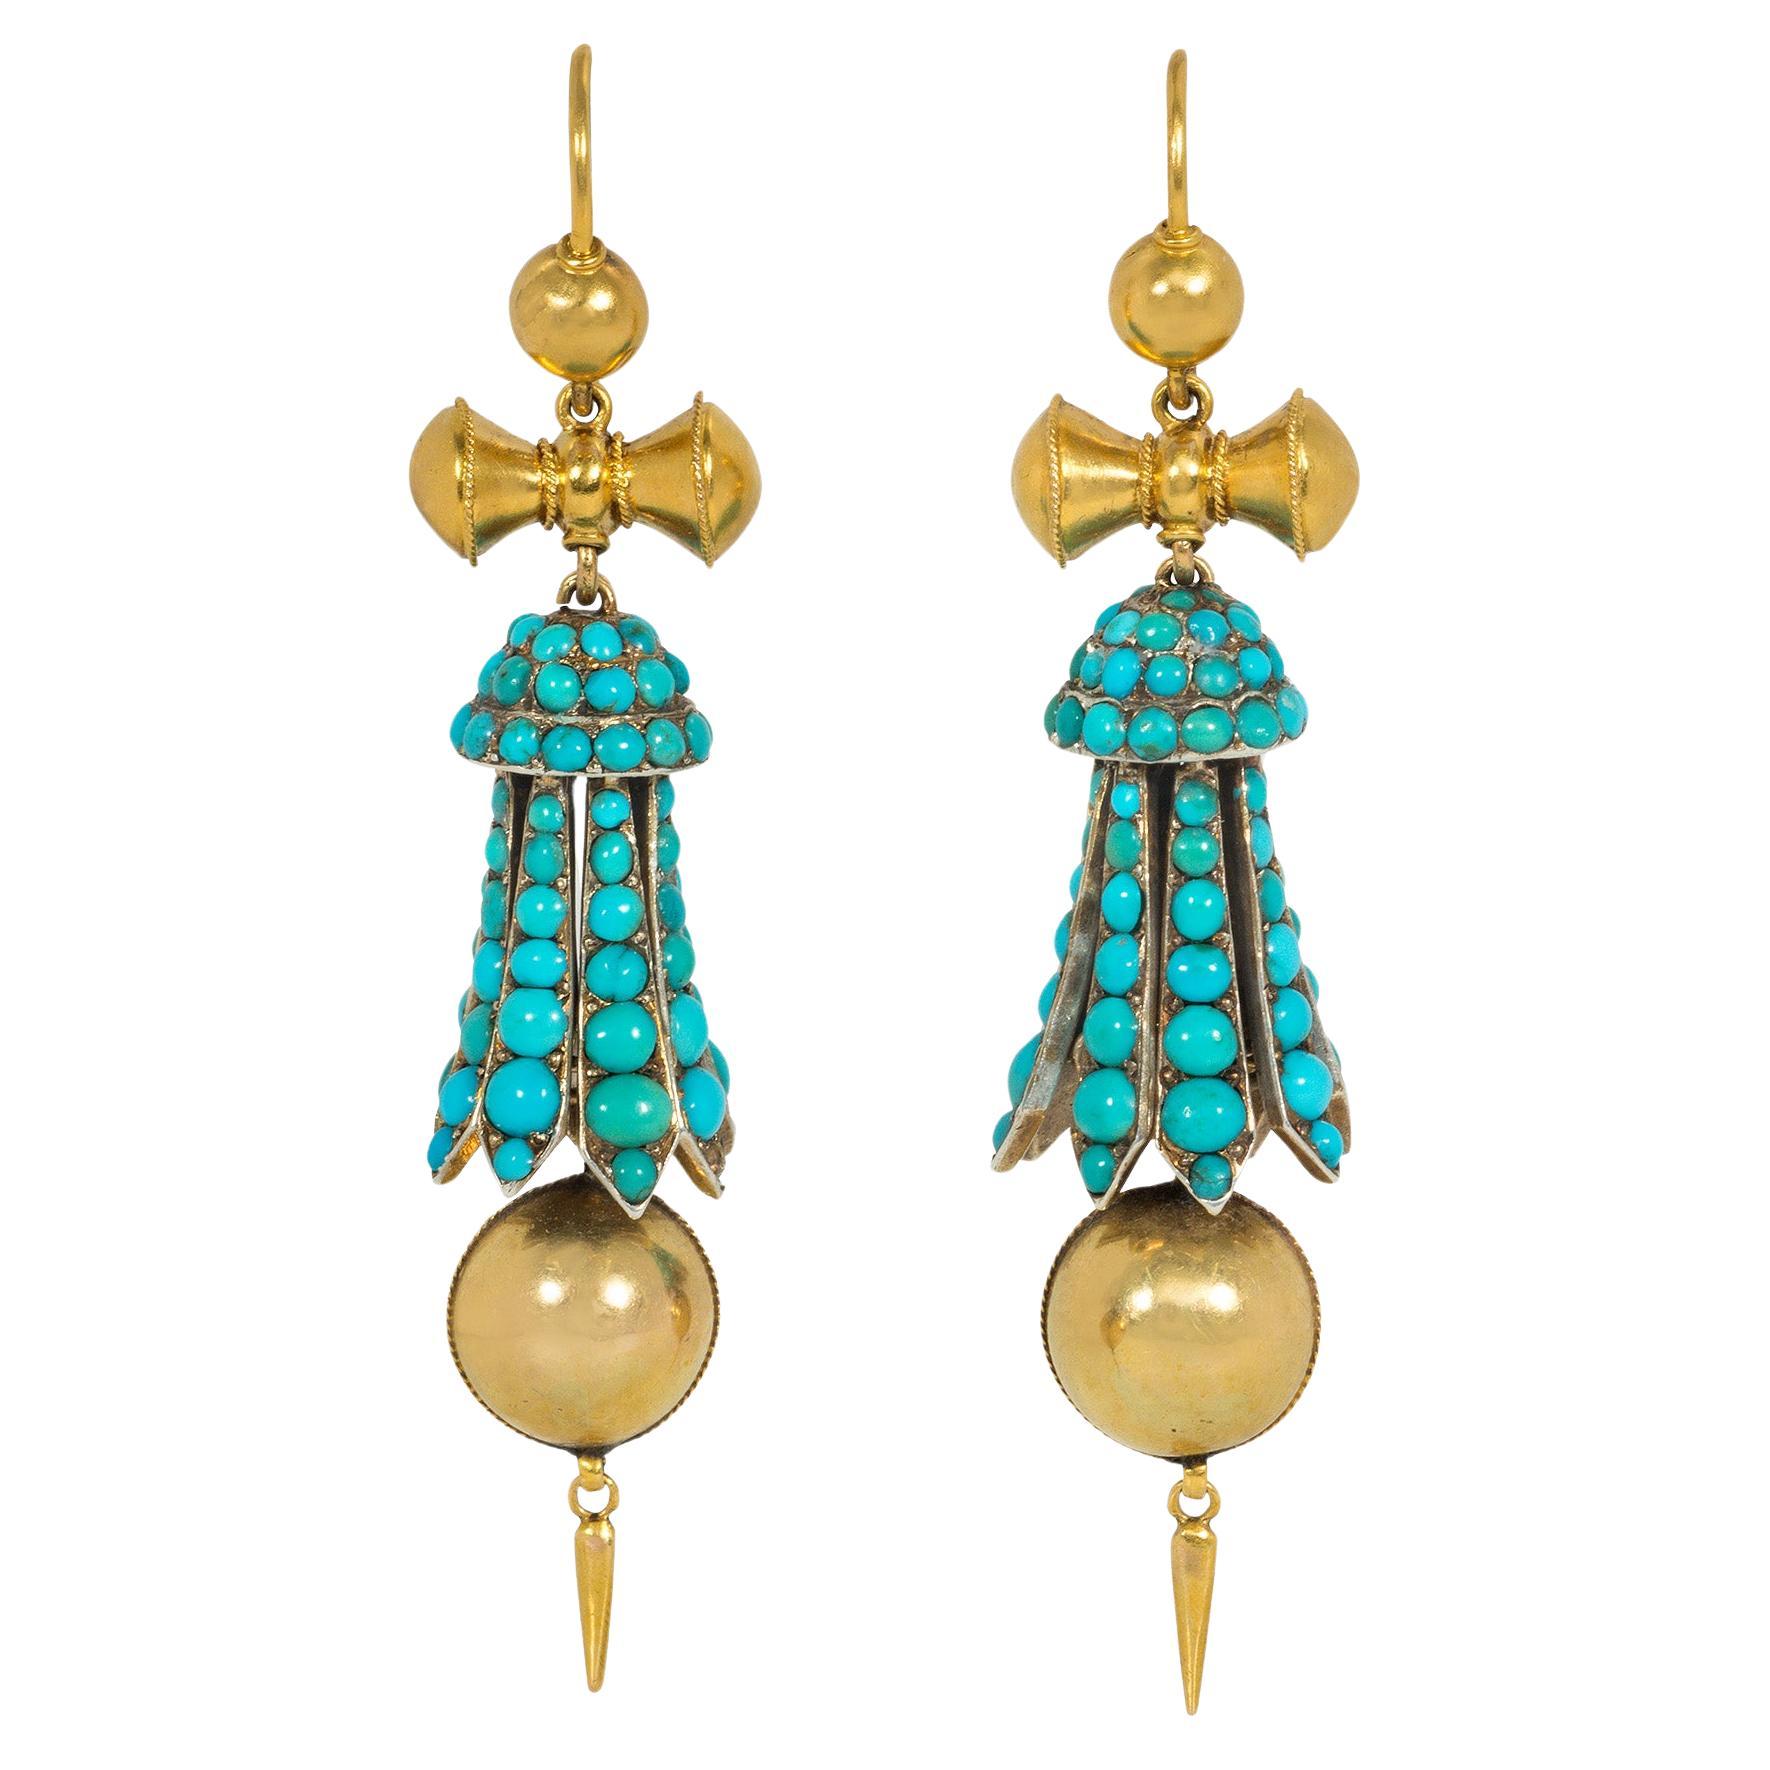 Antique Victorian Gold and Turquoise Earrings with Ball and Dart Pendants